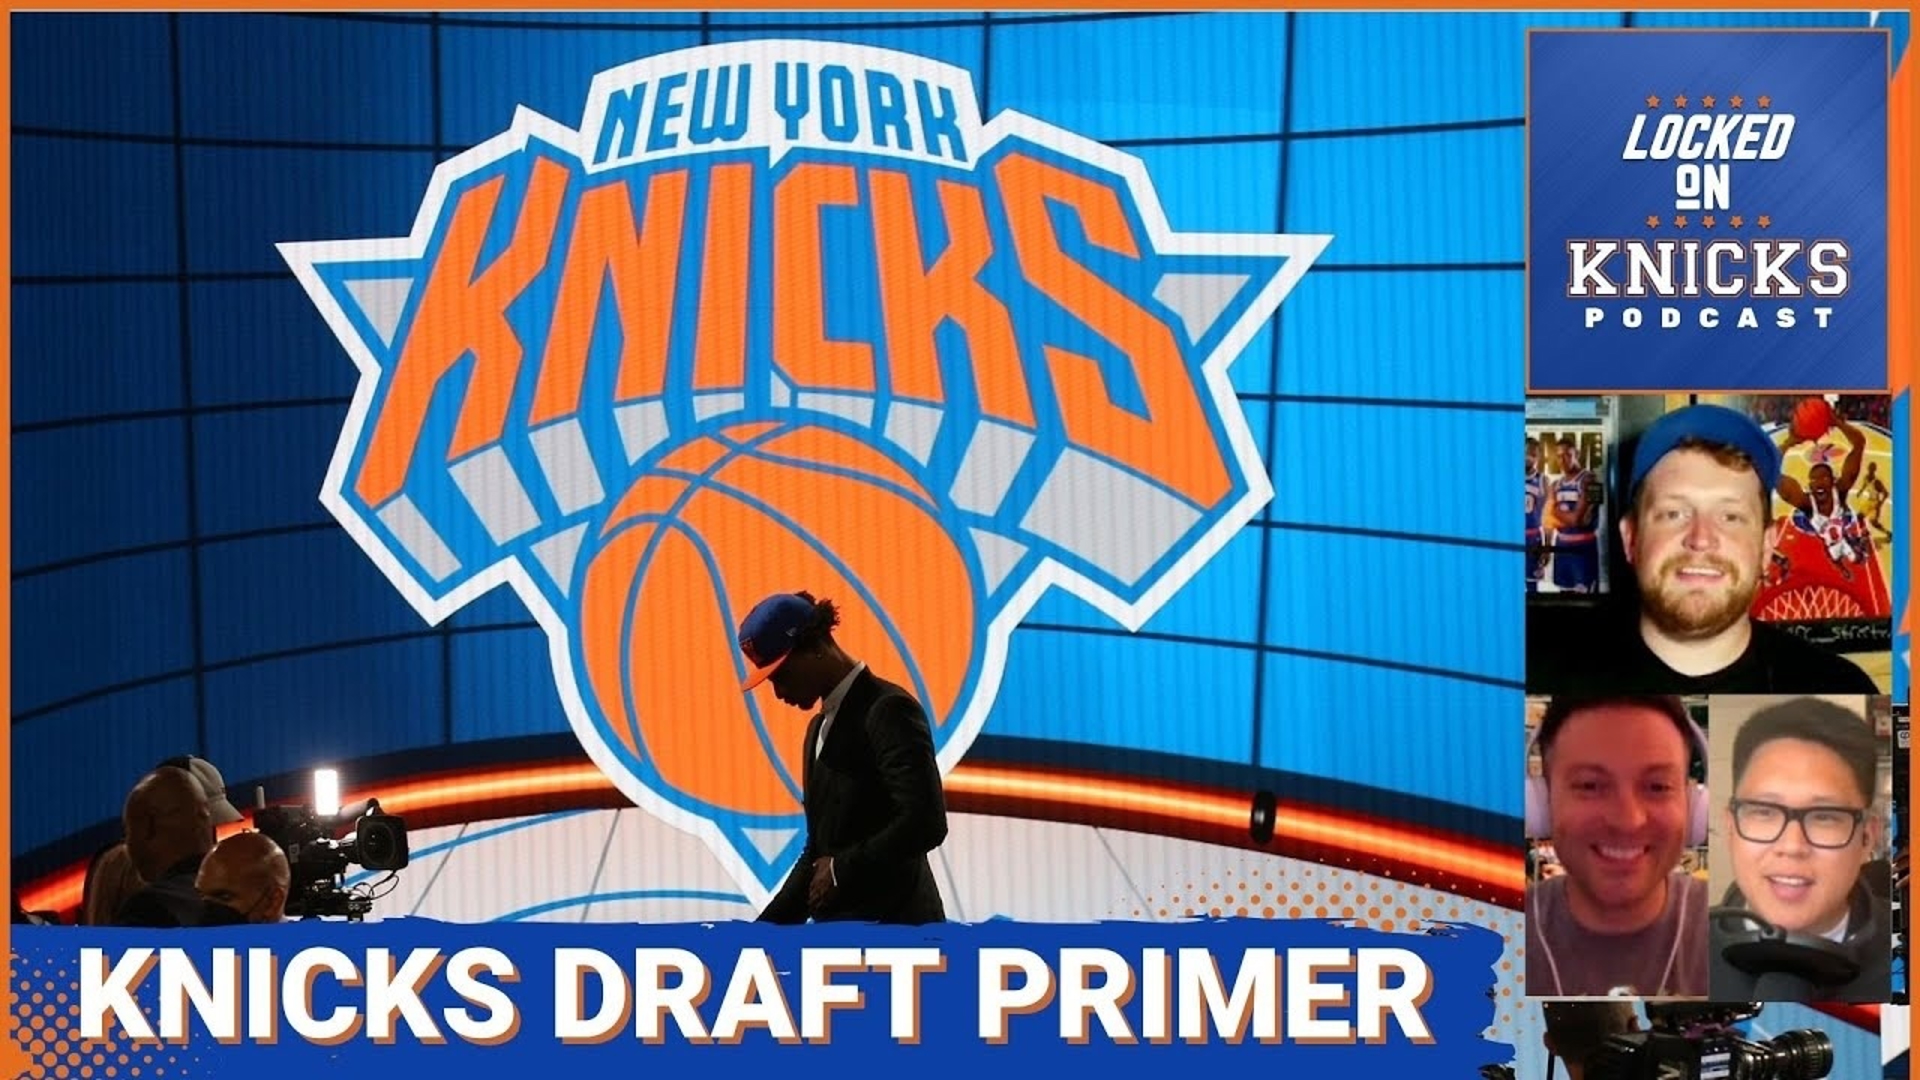 Alex is joined by Albert Ghim and Corey Tulaba of No Ceilings NBA to get into the first of a 3-part episode about the 2024 NBA Draft.